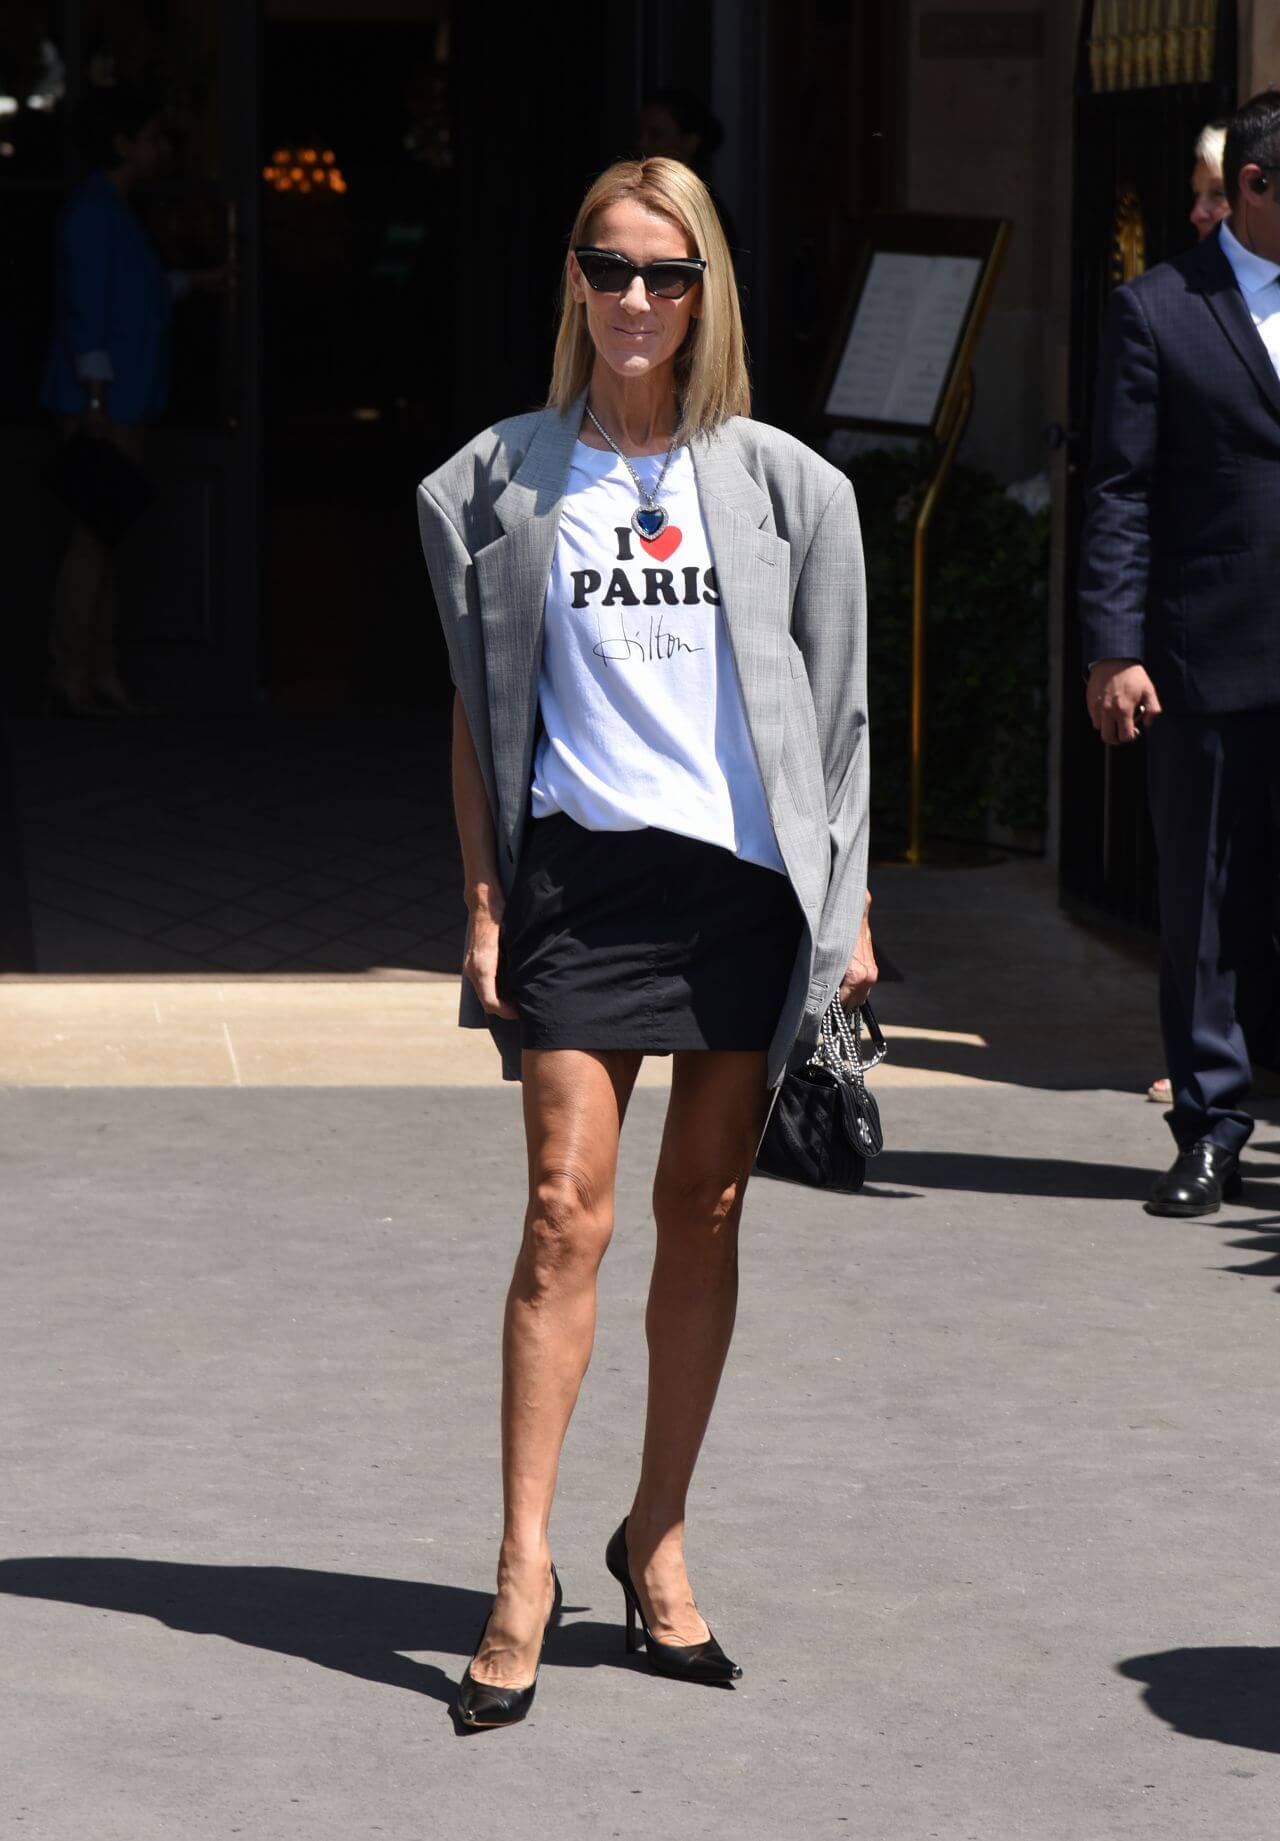 Celine Dion Fabulous Looks In White T-shirt & Black Mini Skirt With Grey Blazer Outfits